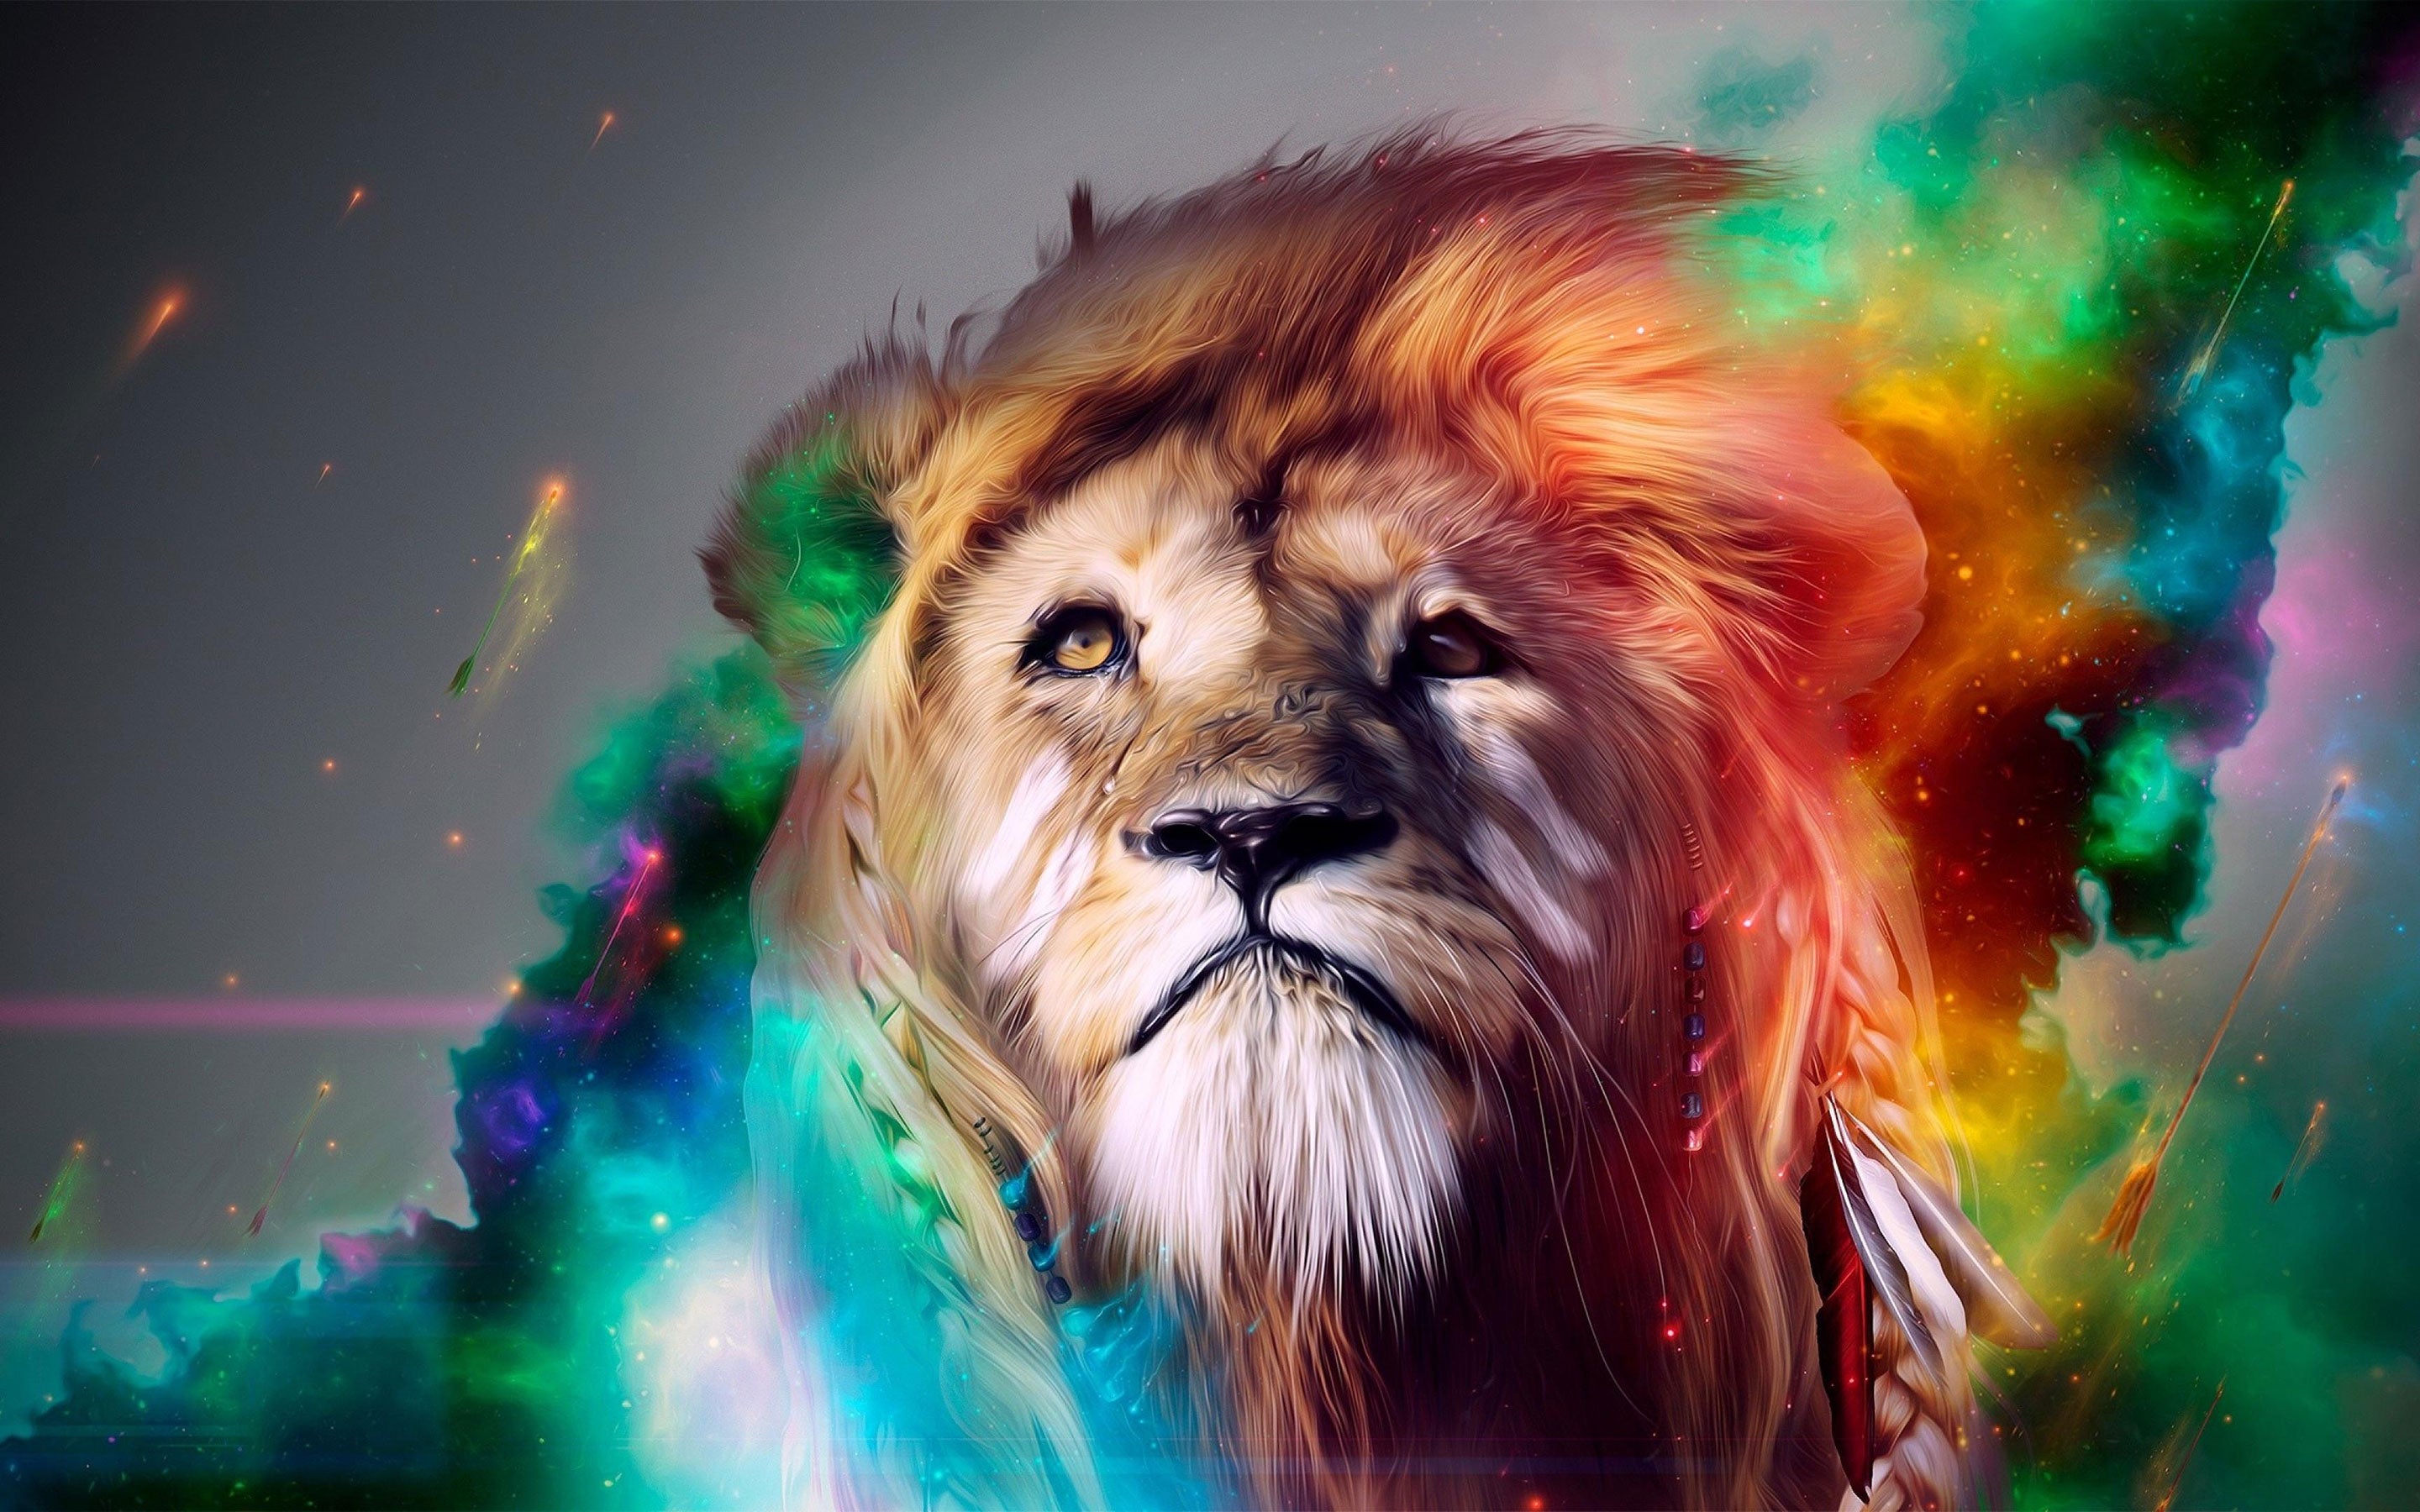 Lion 4K wallpapers for your desktop or mobile screen free and easy